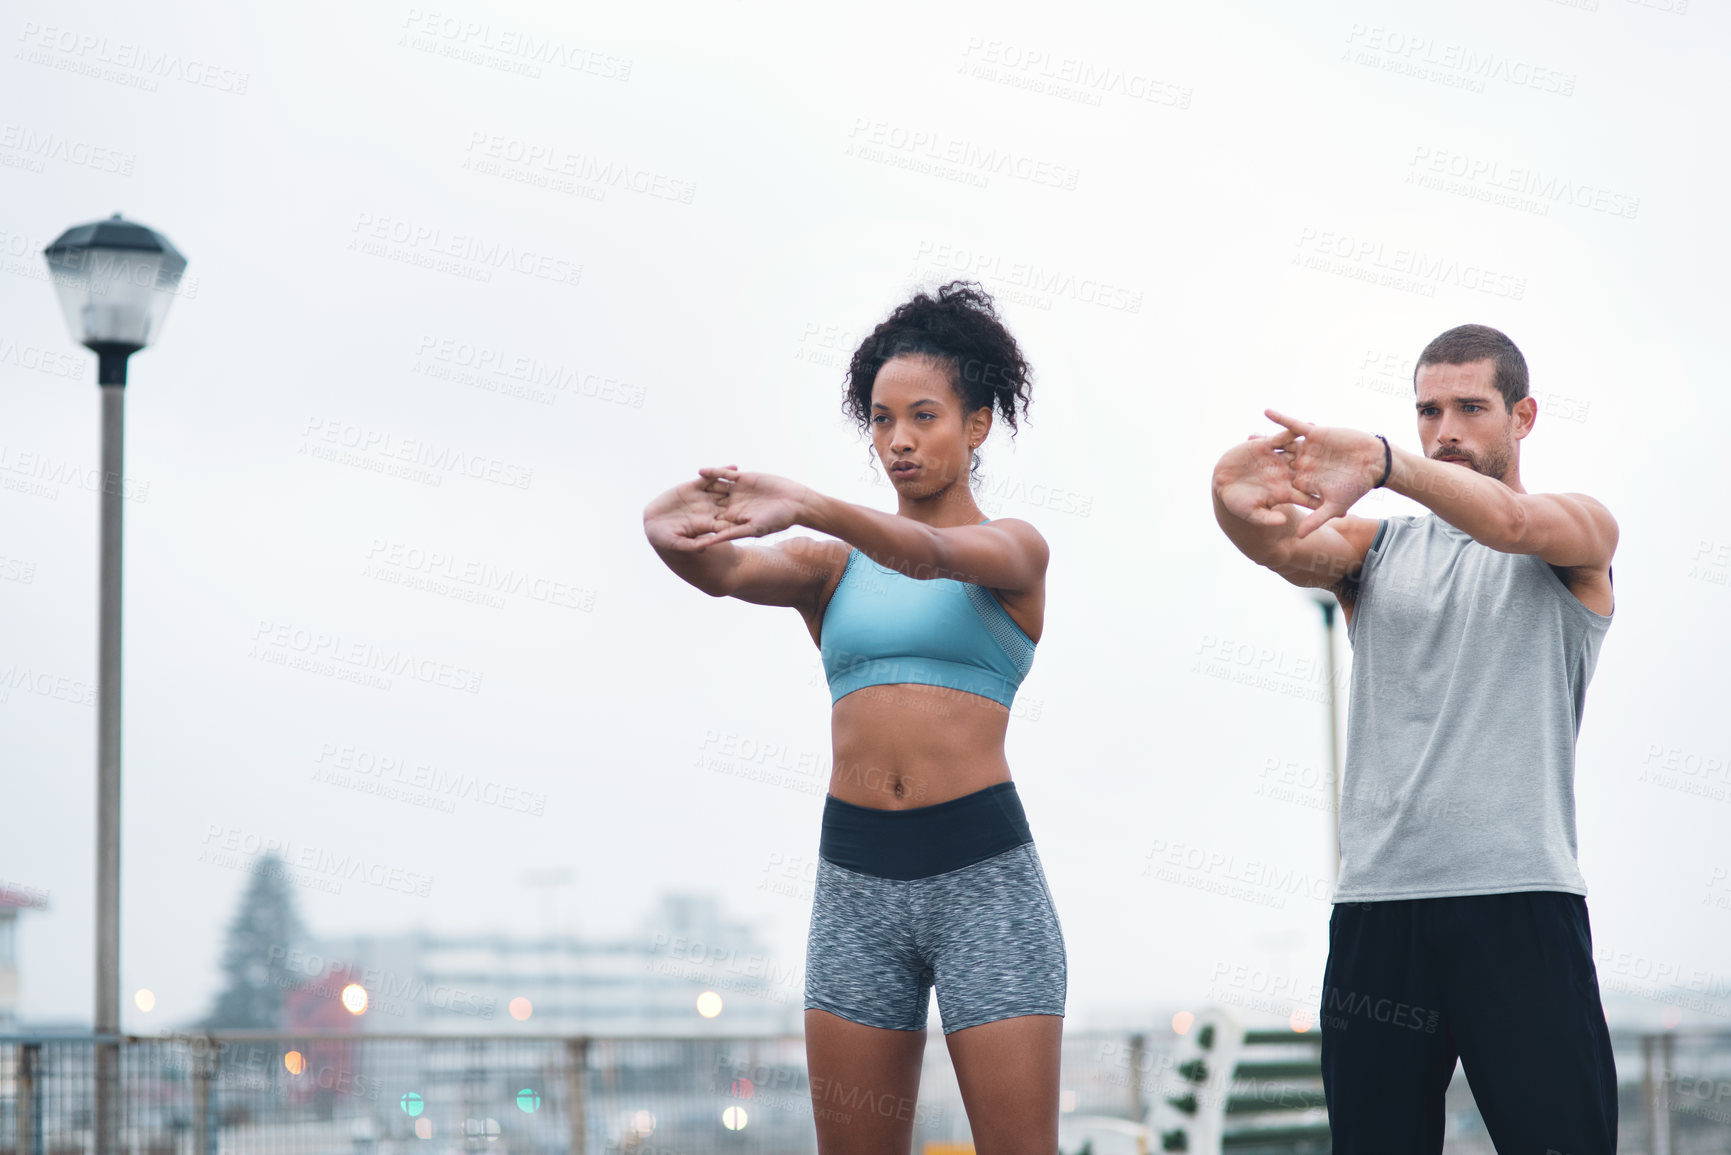 Buy stock photo Shot of two sporty young people stretching while exercising outdoors